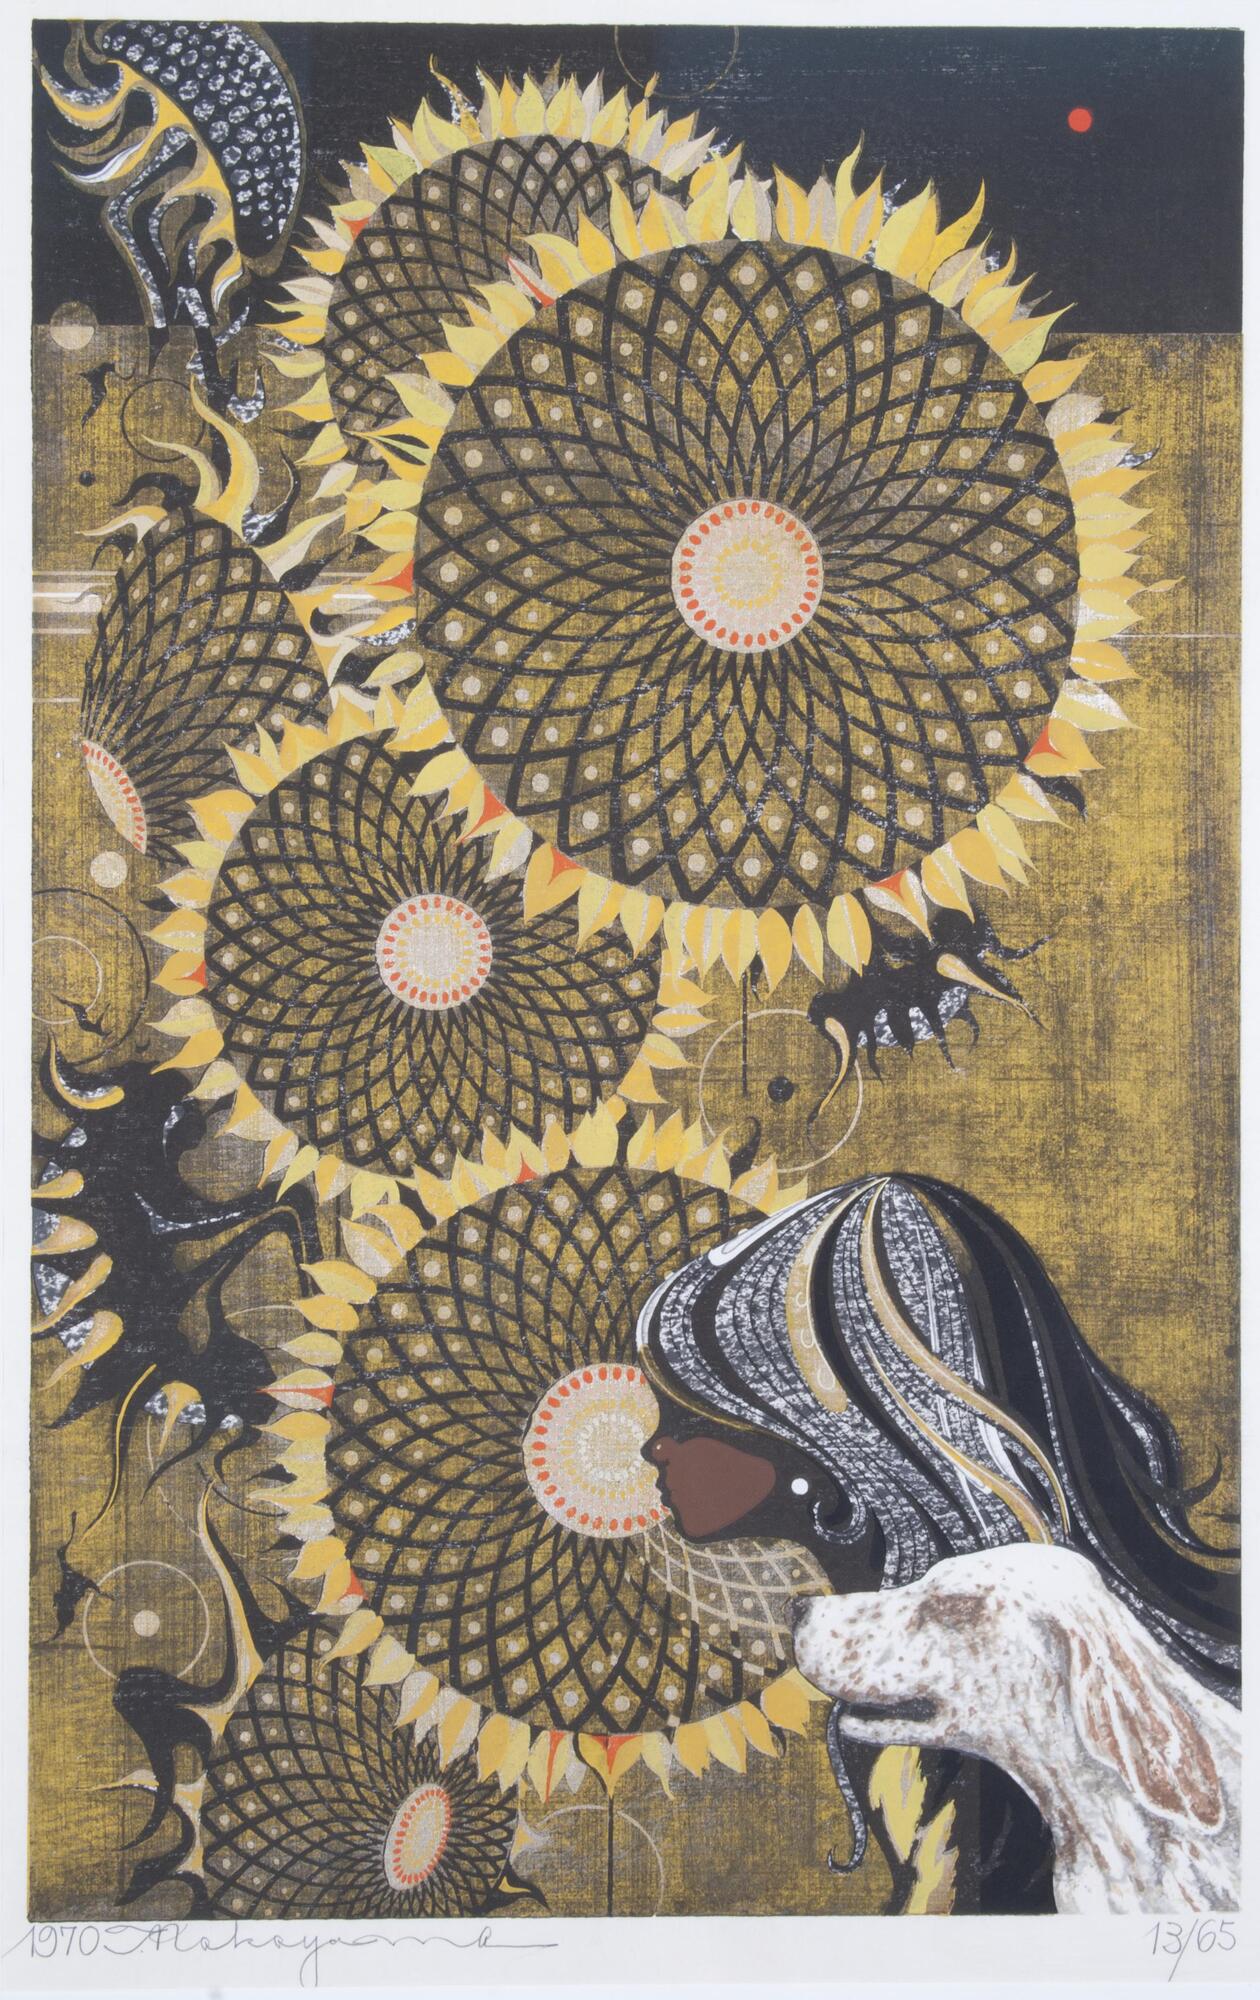 A girl with her head and body in profile, her head stretched in front of her body. Her black hair is highlighted with white, brown, and gold strands. She is wearing black and gold clothing and a white dog is beside her. Surrounding them are many sunflowers against a gold background.